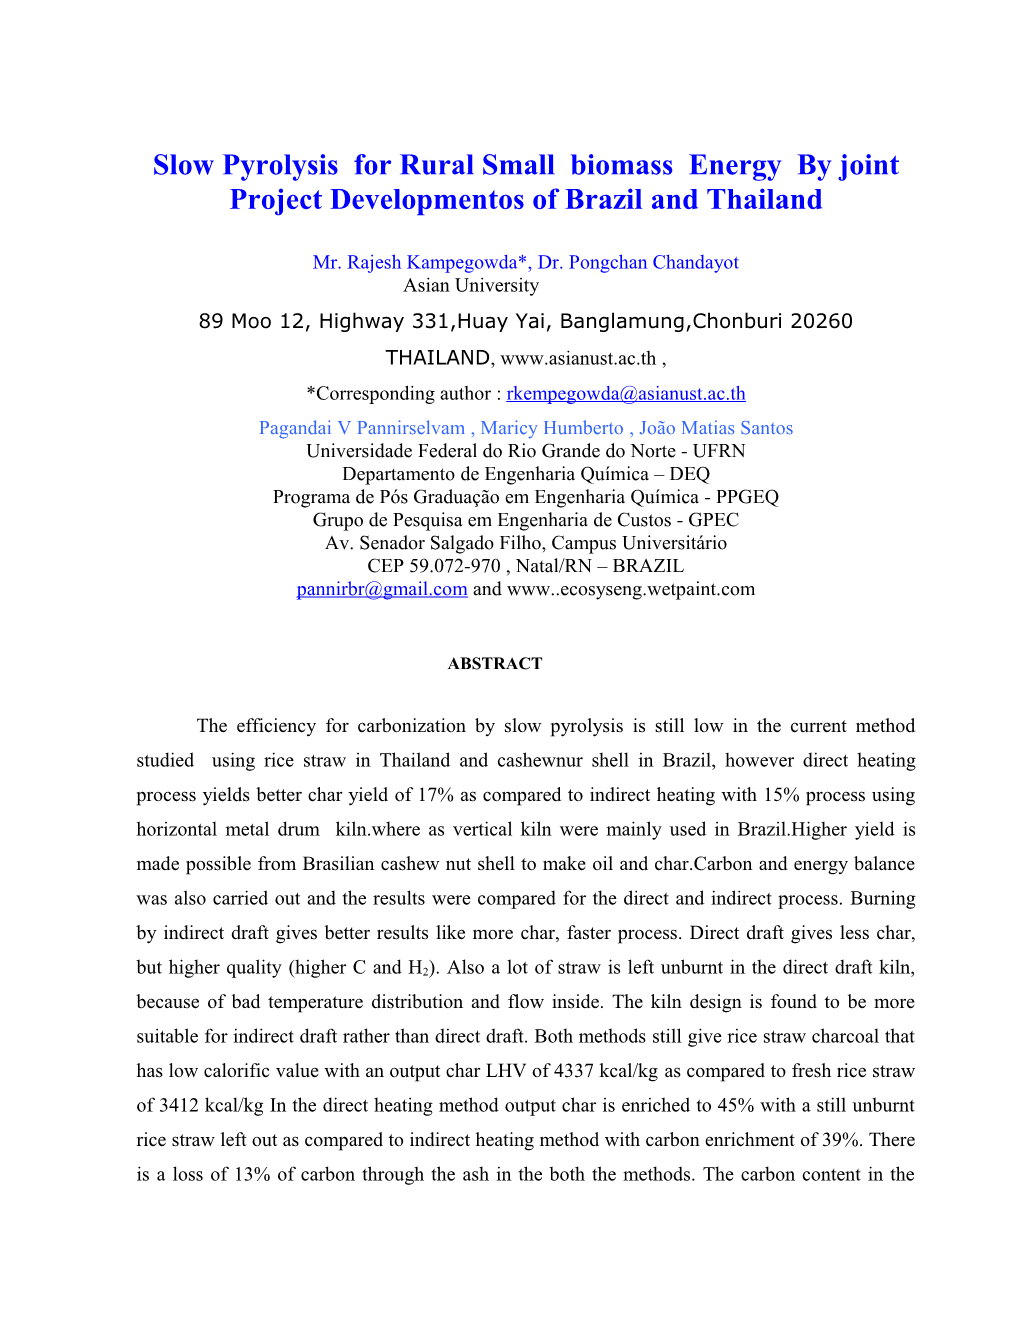 Slow Pyrolysis for Rural Small Biomass Energy by Joint Project Developmentos of Brazil and Thailand